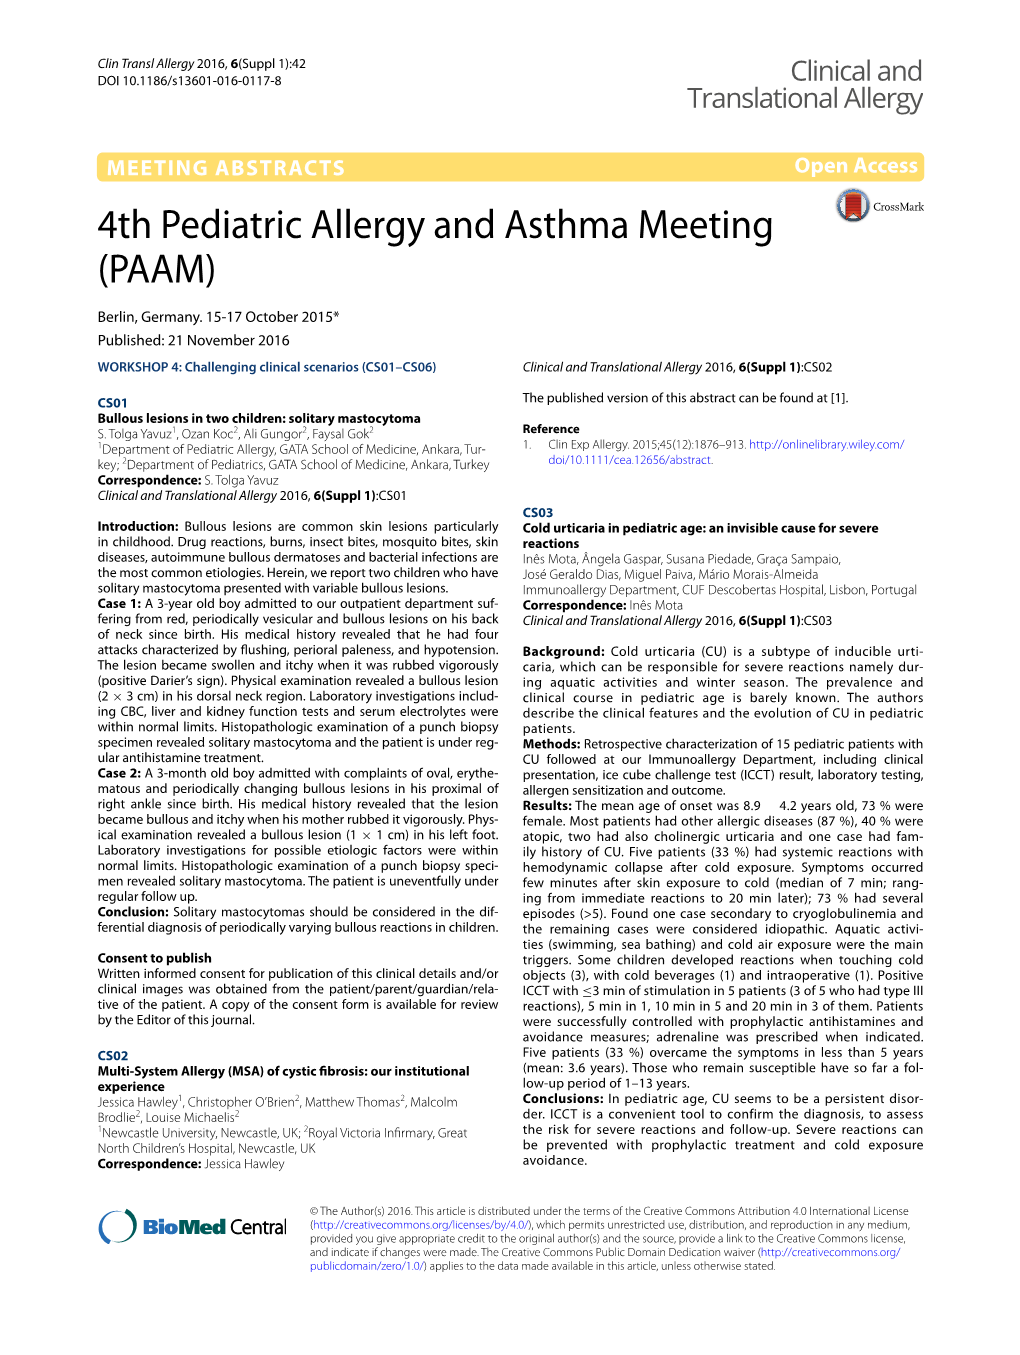 4Th Pediatric Allergy and Asthma Meeting (PAAM)